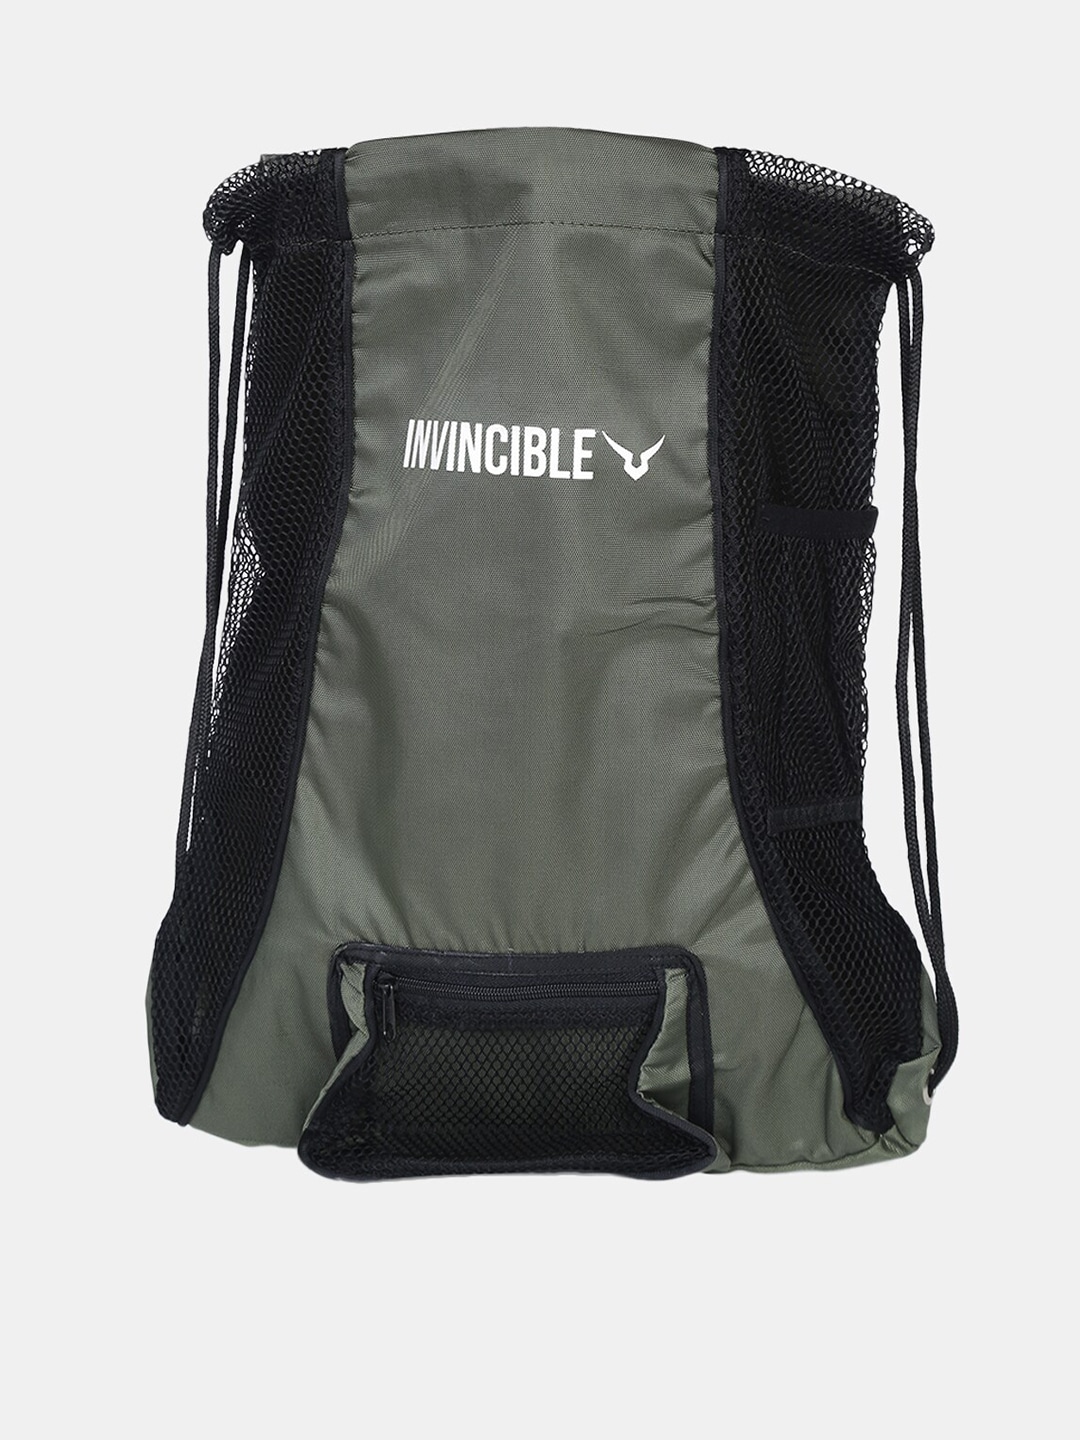 Invincible Unisex Olive Green & Black Brand Logo Backpack Price in India